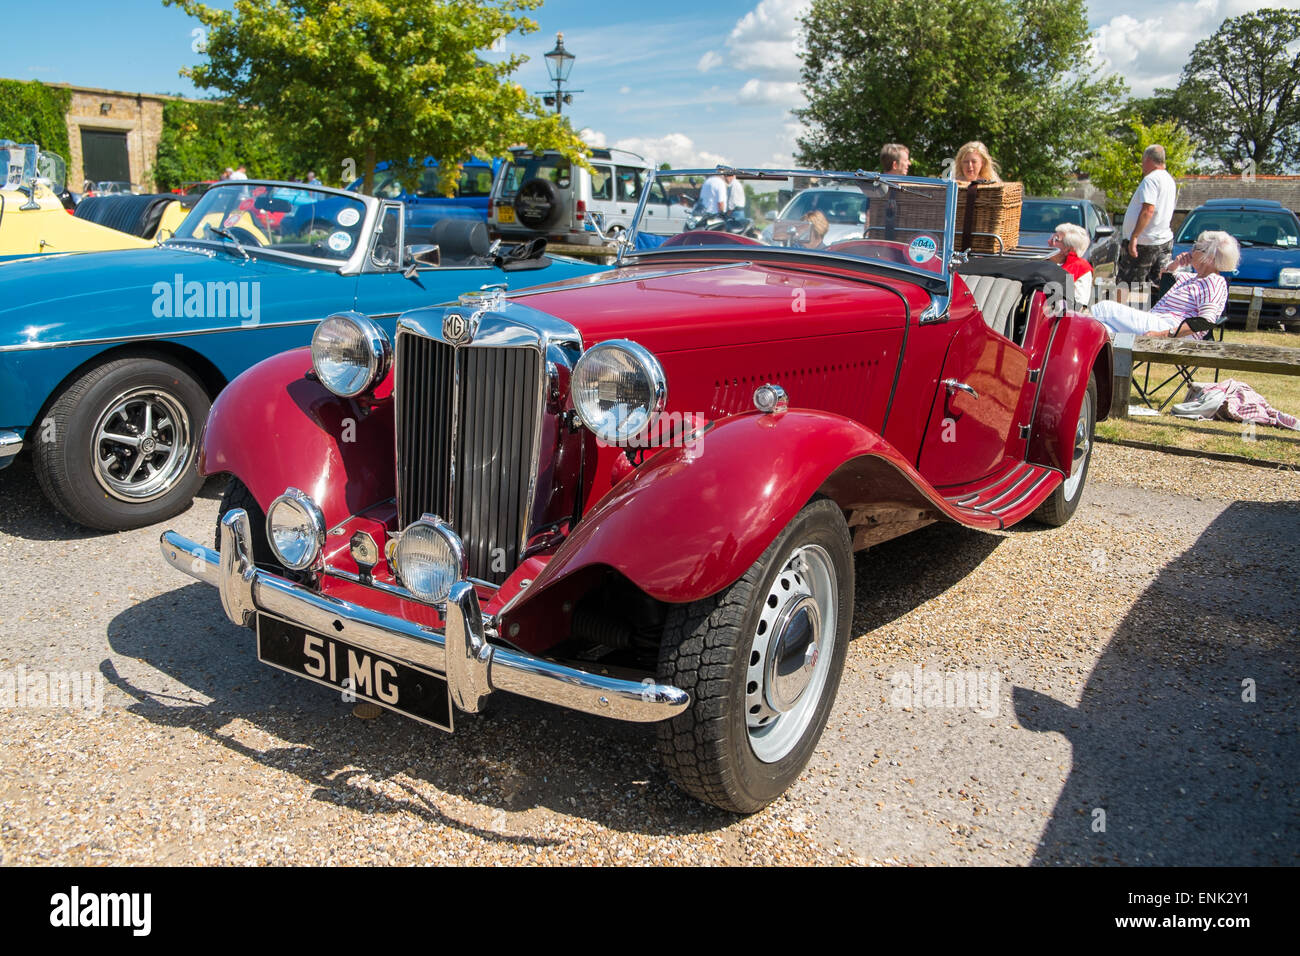 WINDSOR, BERKSHIRE, UK- AUGUST 3, 2014: A Red Classic MG TF on show at a Classic Car Show in August 2013. Stock Photo